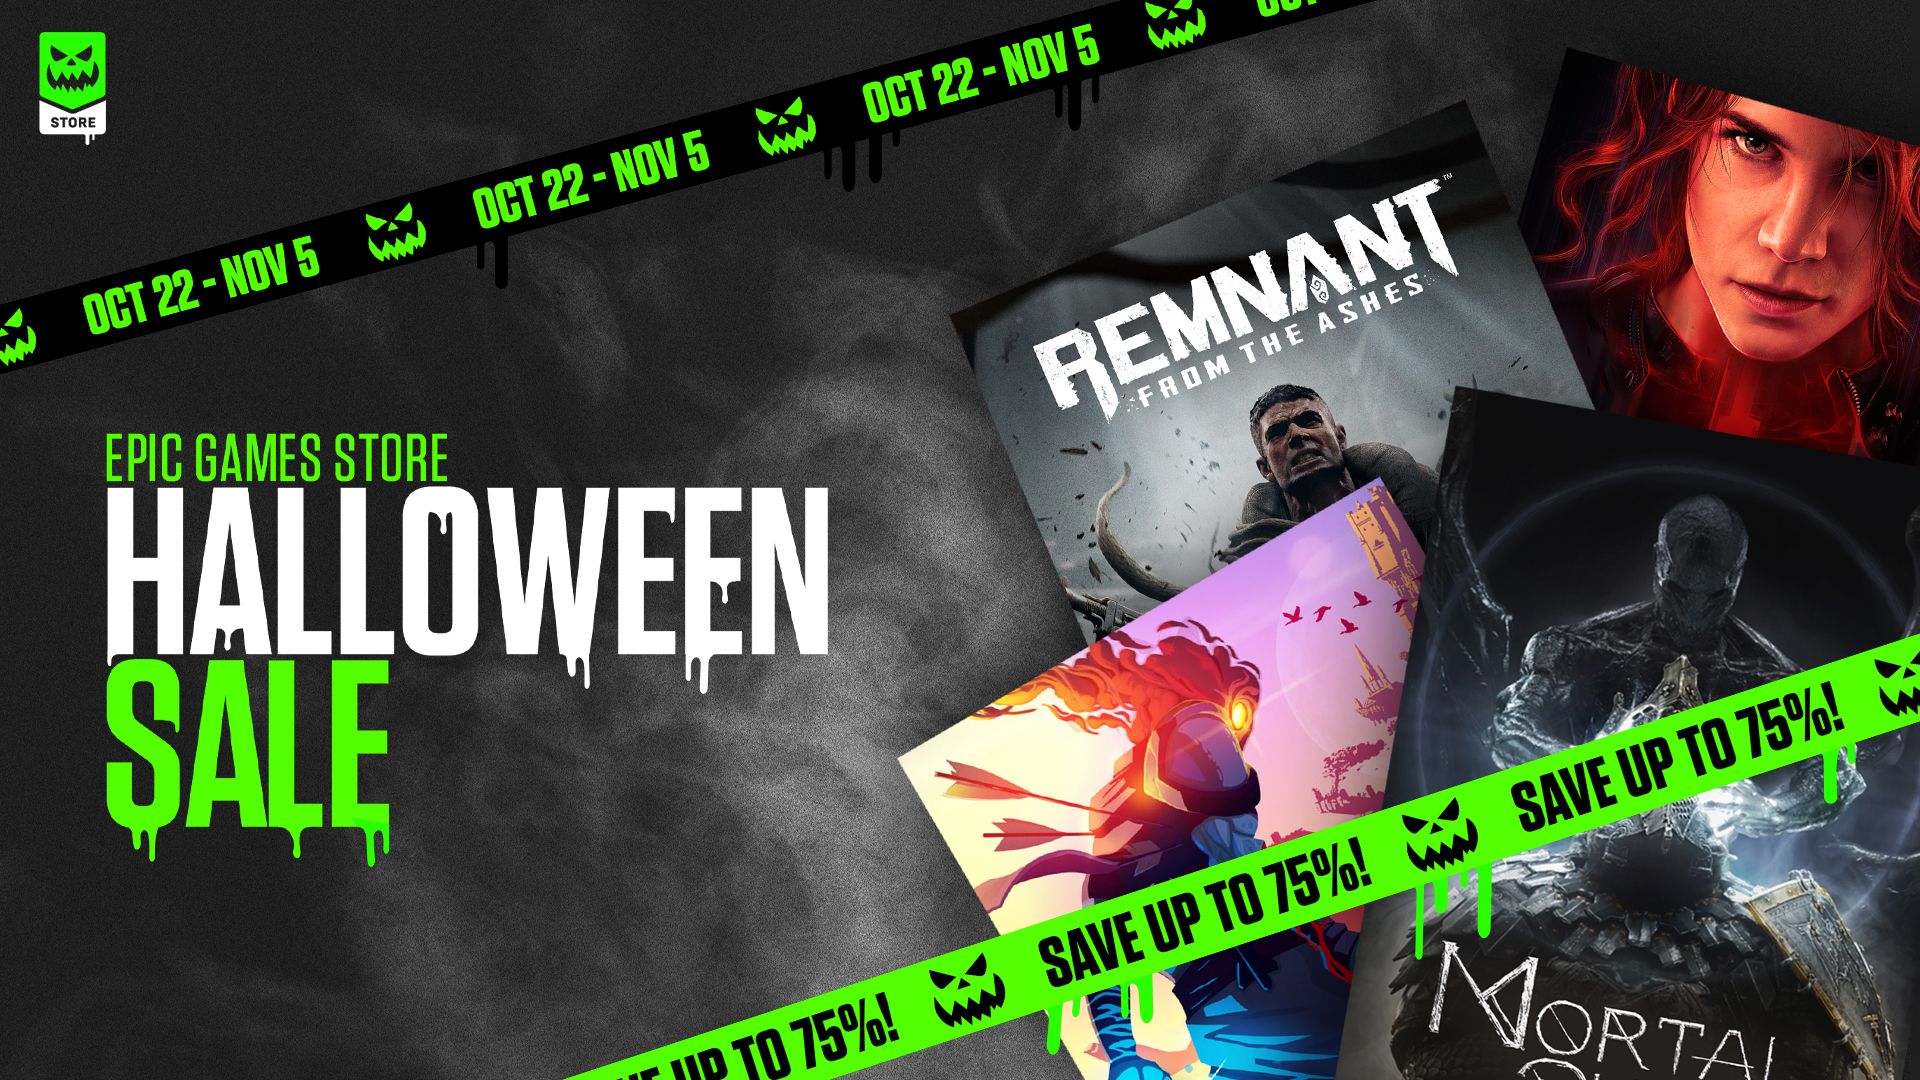 Epic Games Store Halloween Sale 2020